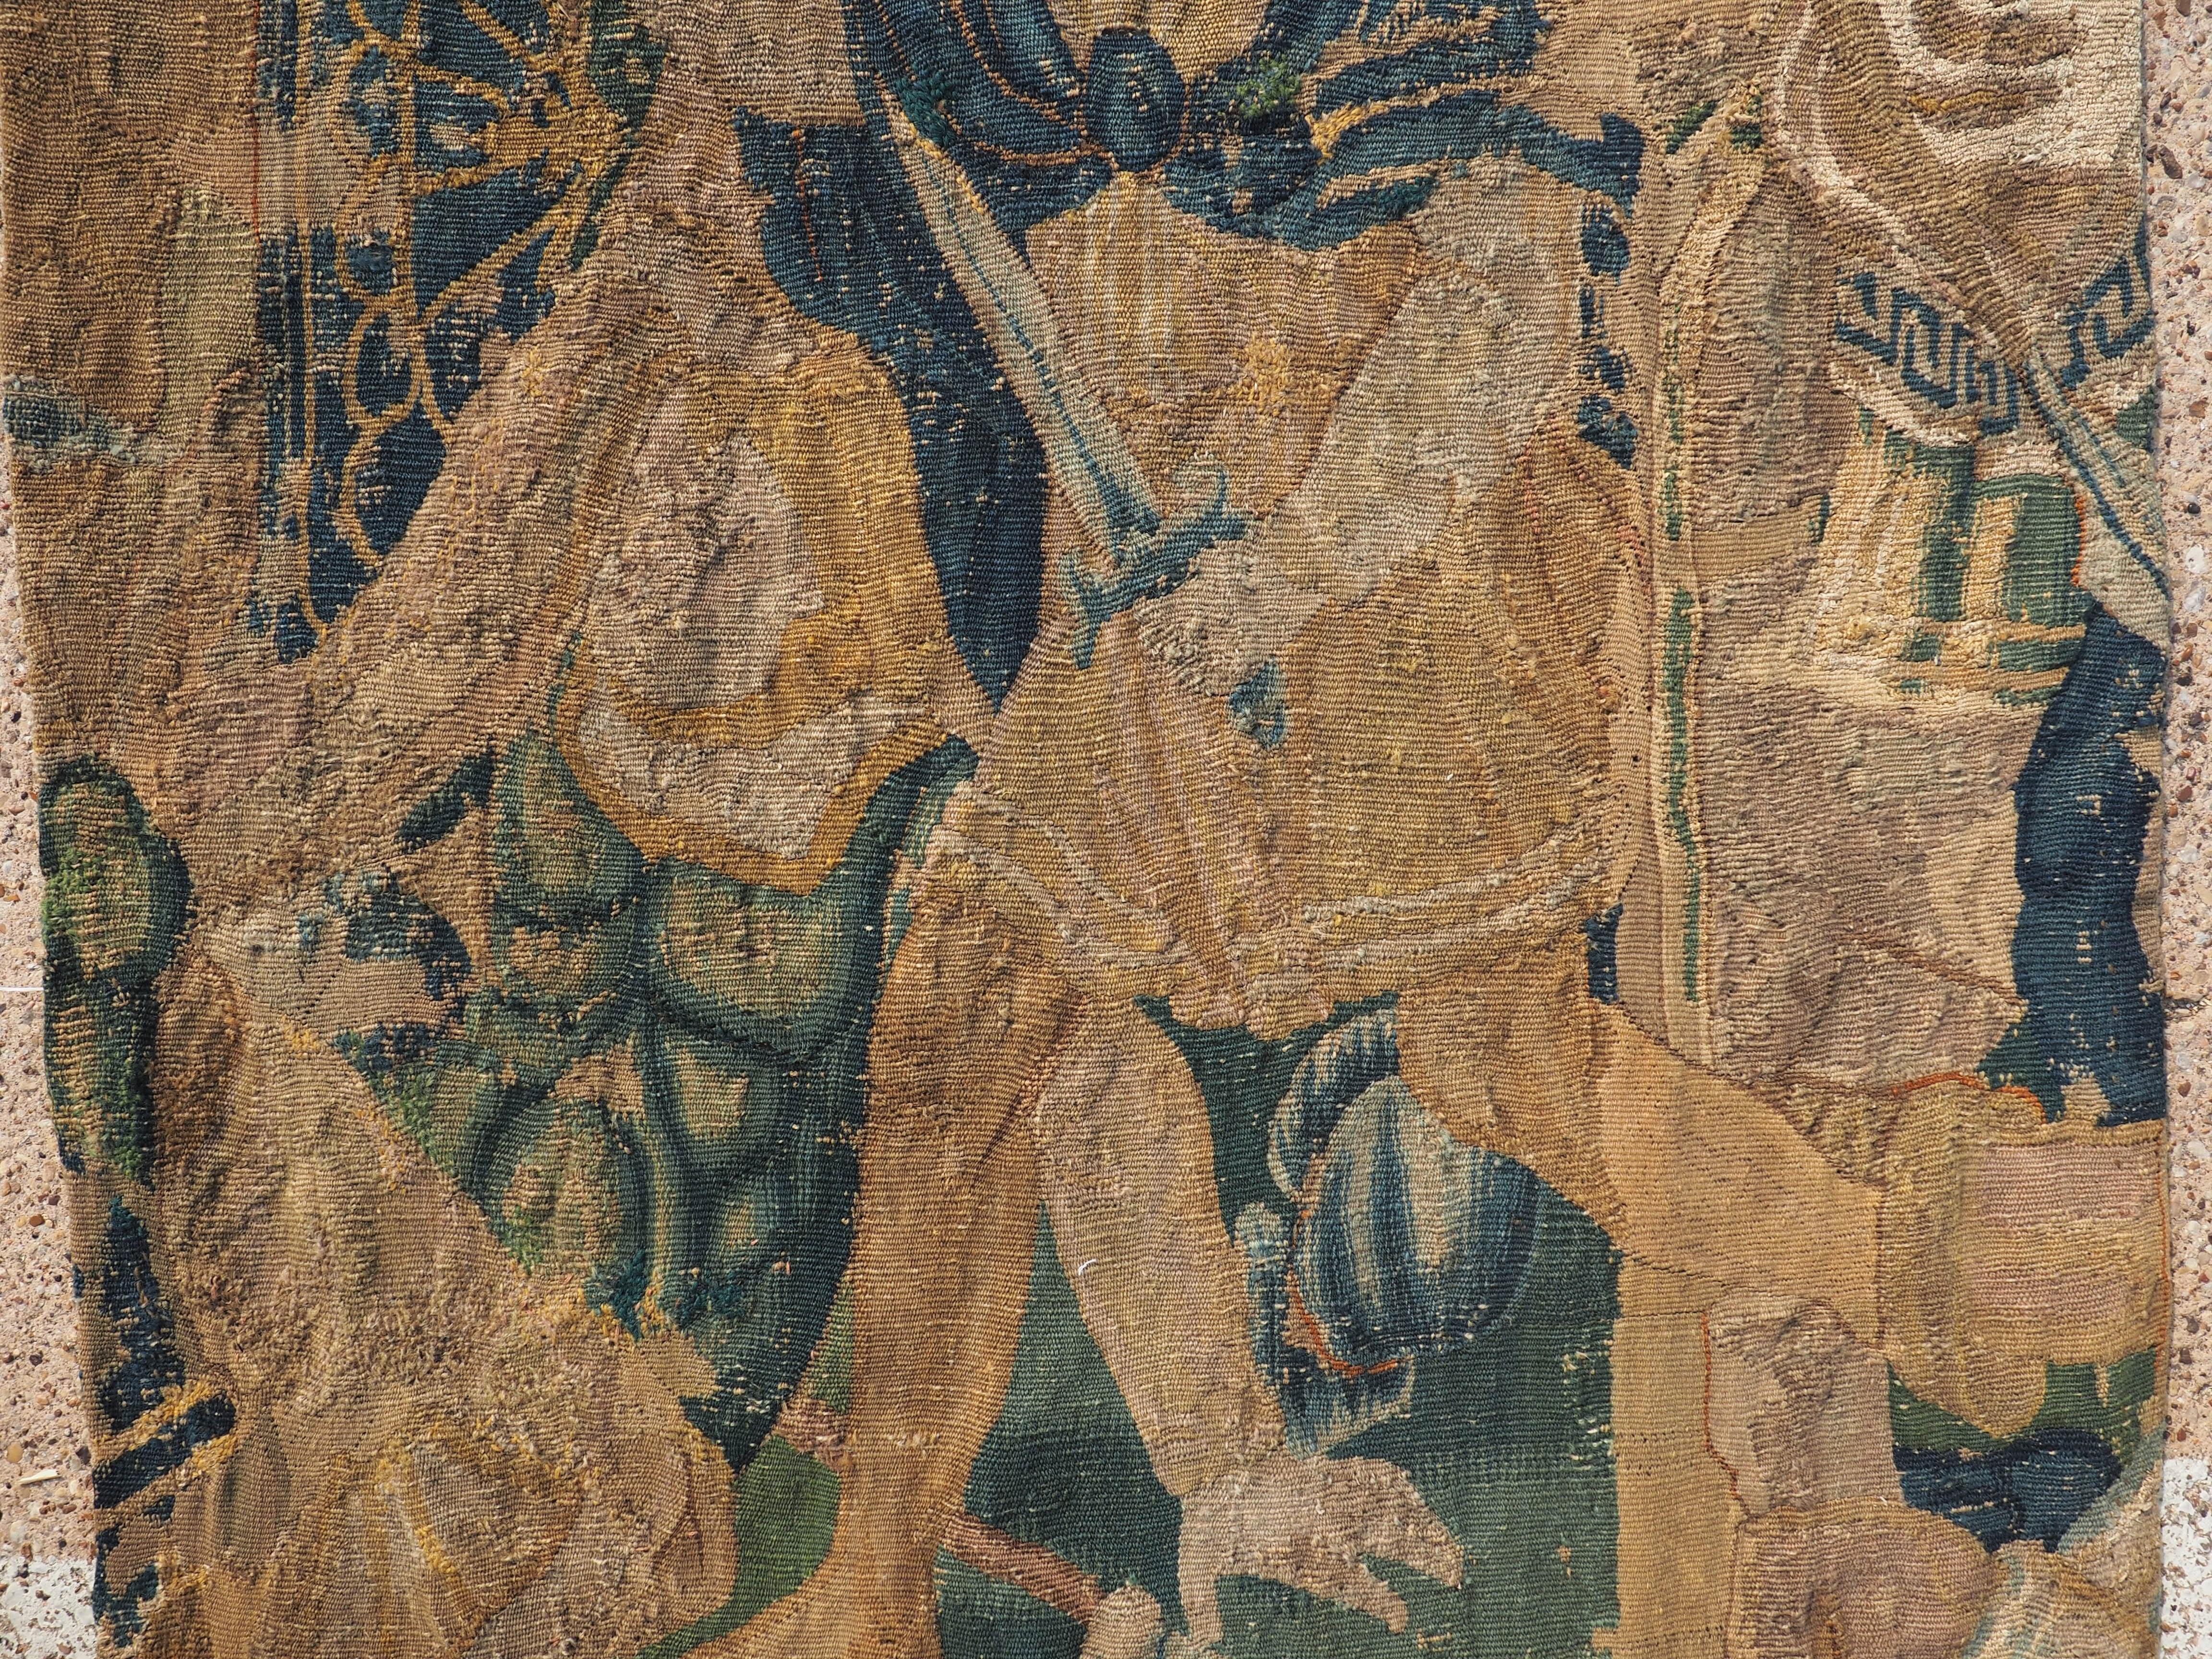 Baroque 17th Century Tapestry Fragment from Flanders